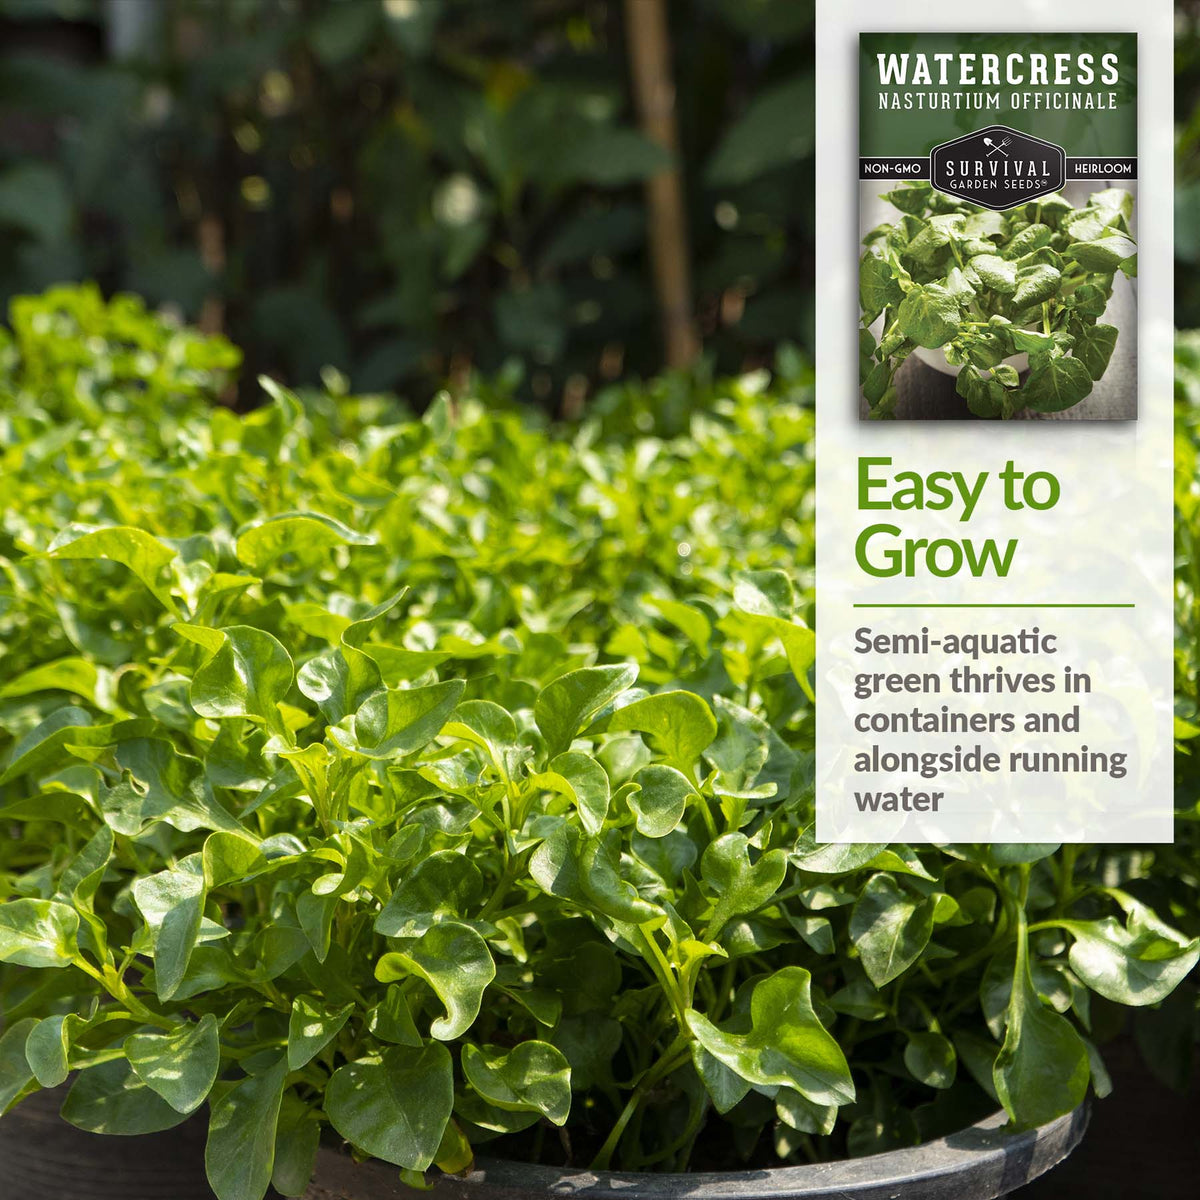 Watercress thrives in containers and alongside running water